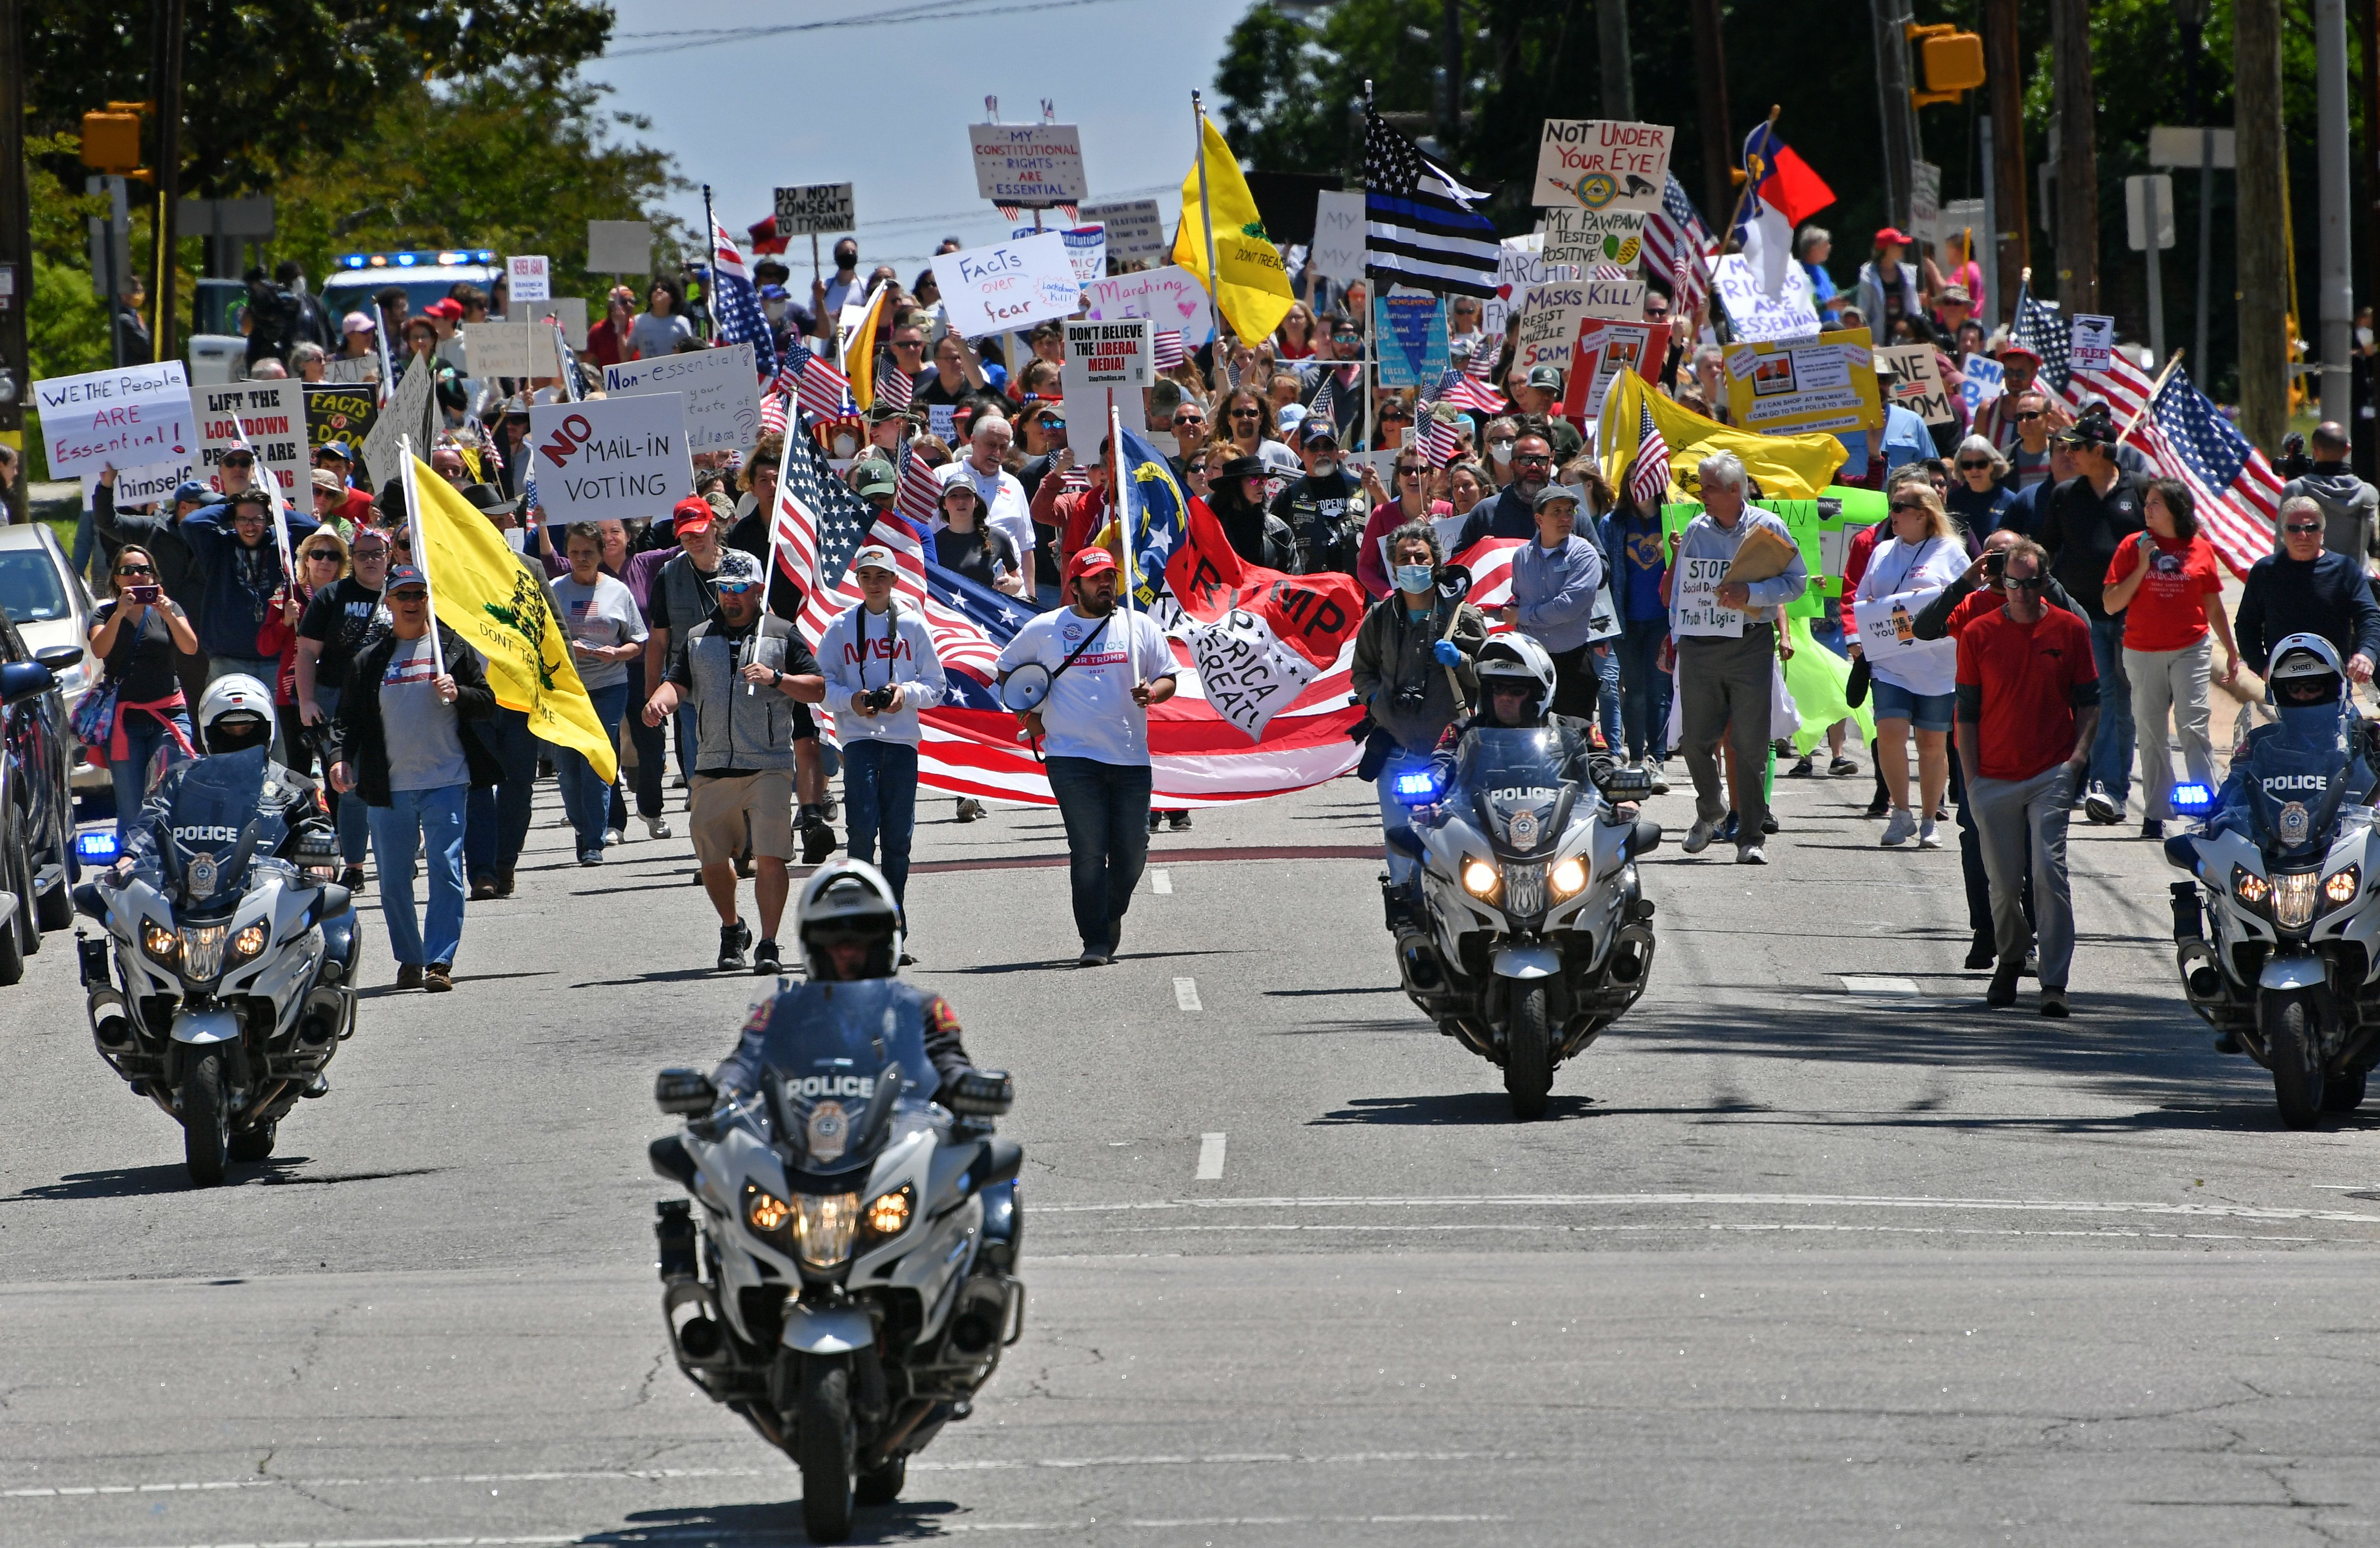 In this image, a large crowd walking down the middle of a street follows a police escort of three motorcycles